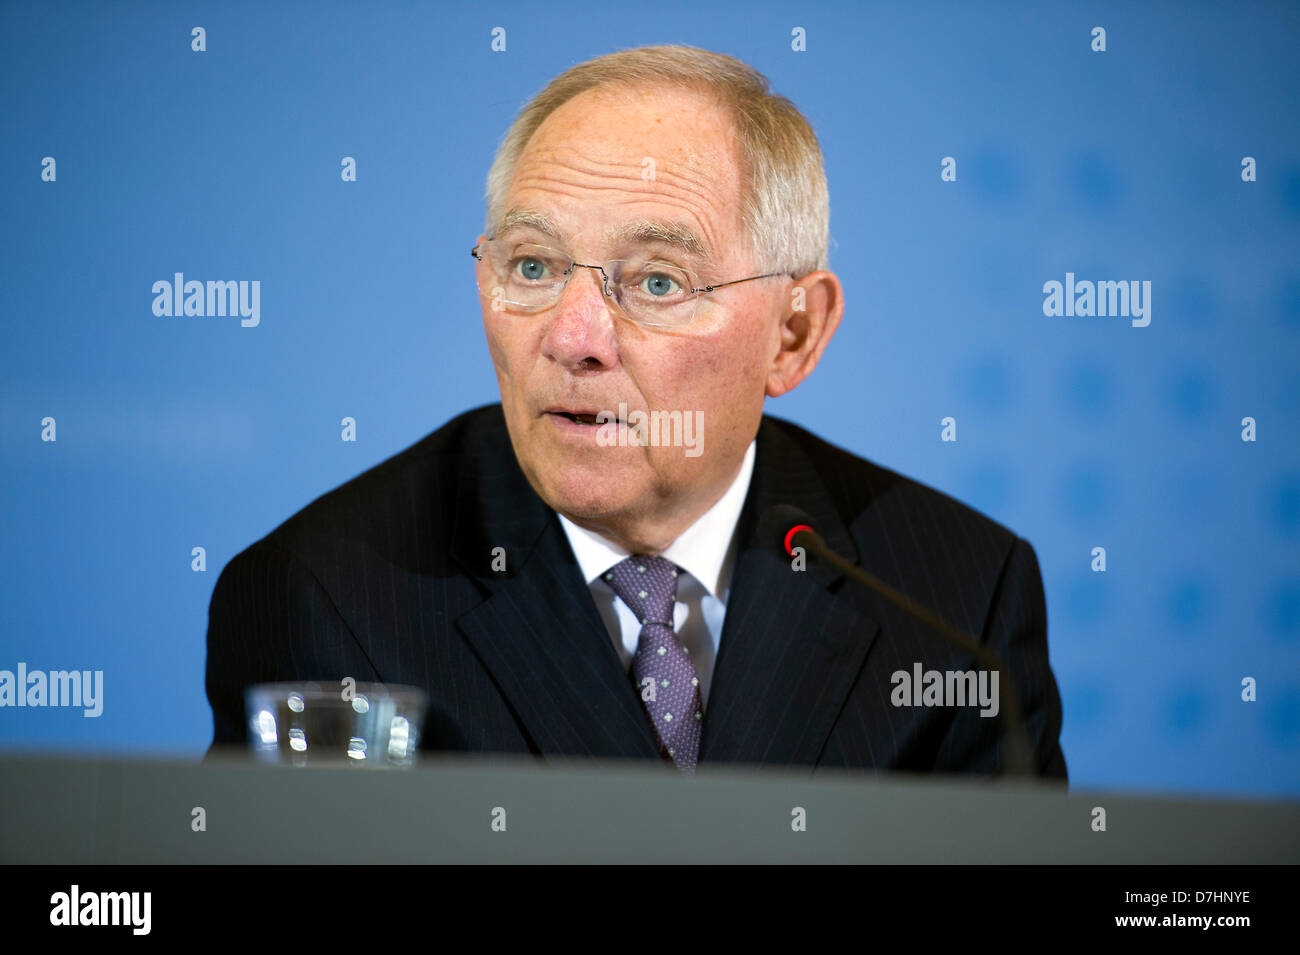 Germany, Berlin. May 8th 2013. Federal Minister of Finance, Wolfgang Schäuble holds a press conference on 2013 tax projections.  Credit Credit: Gonçalo Silva/Alamy Live News. Stock Photo